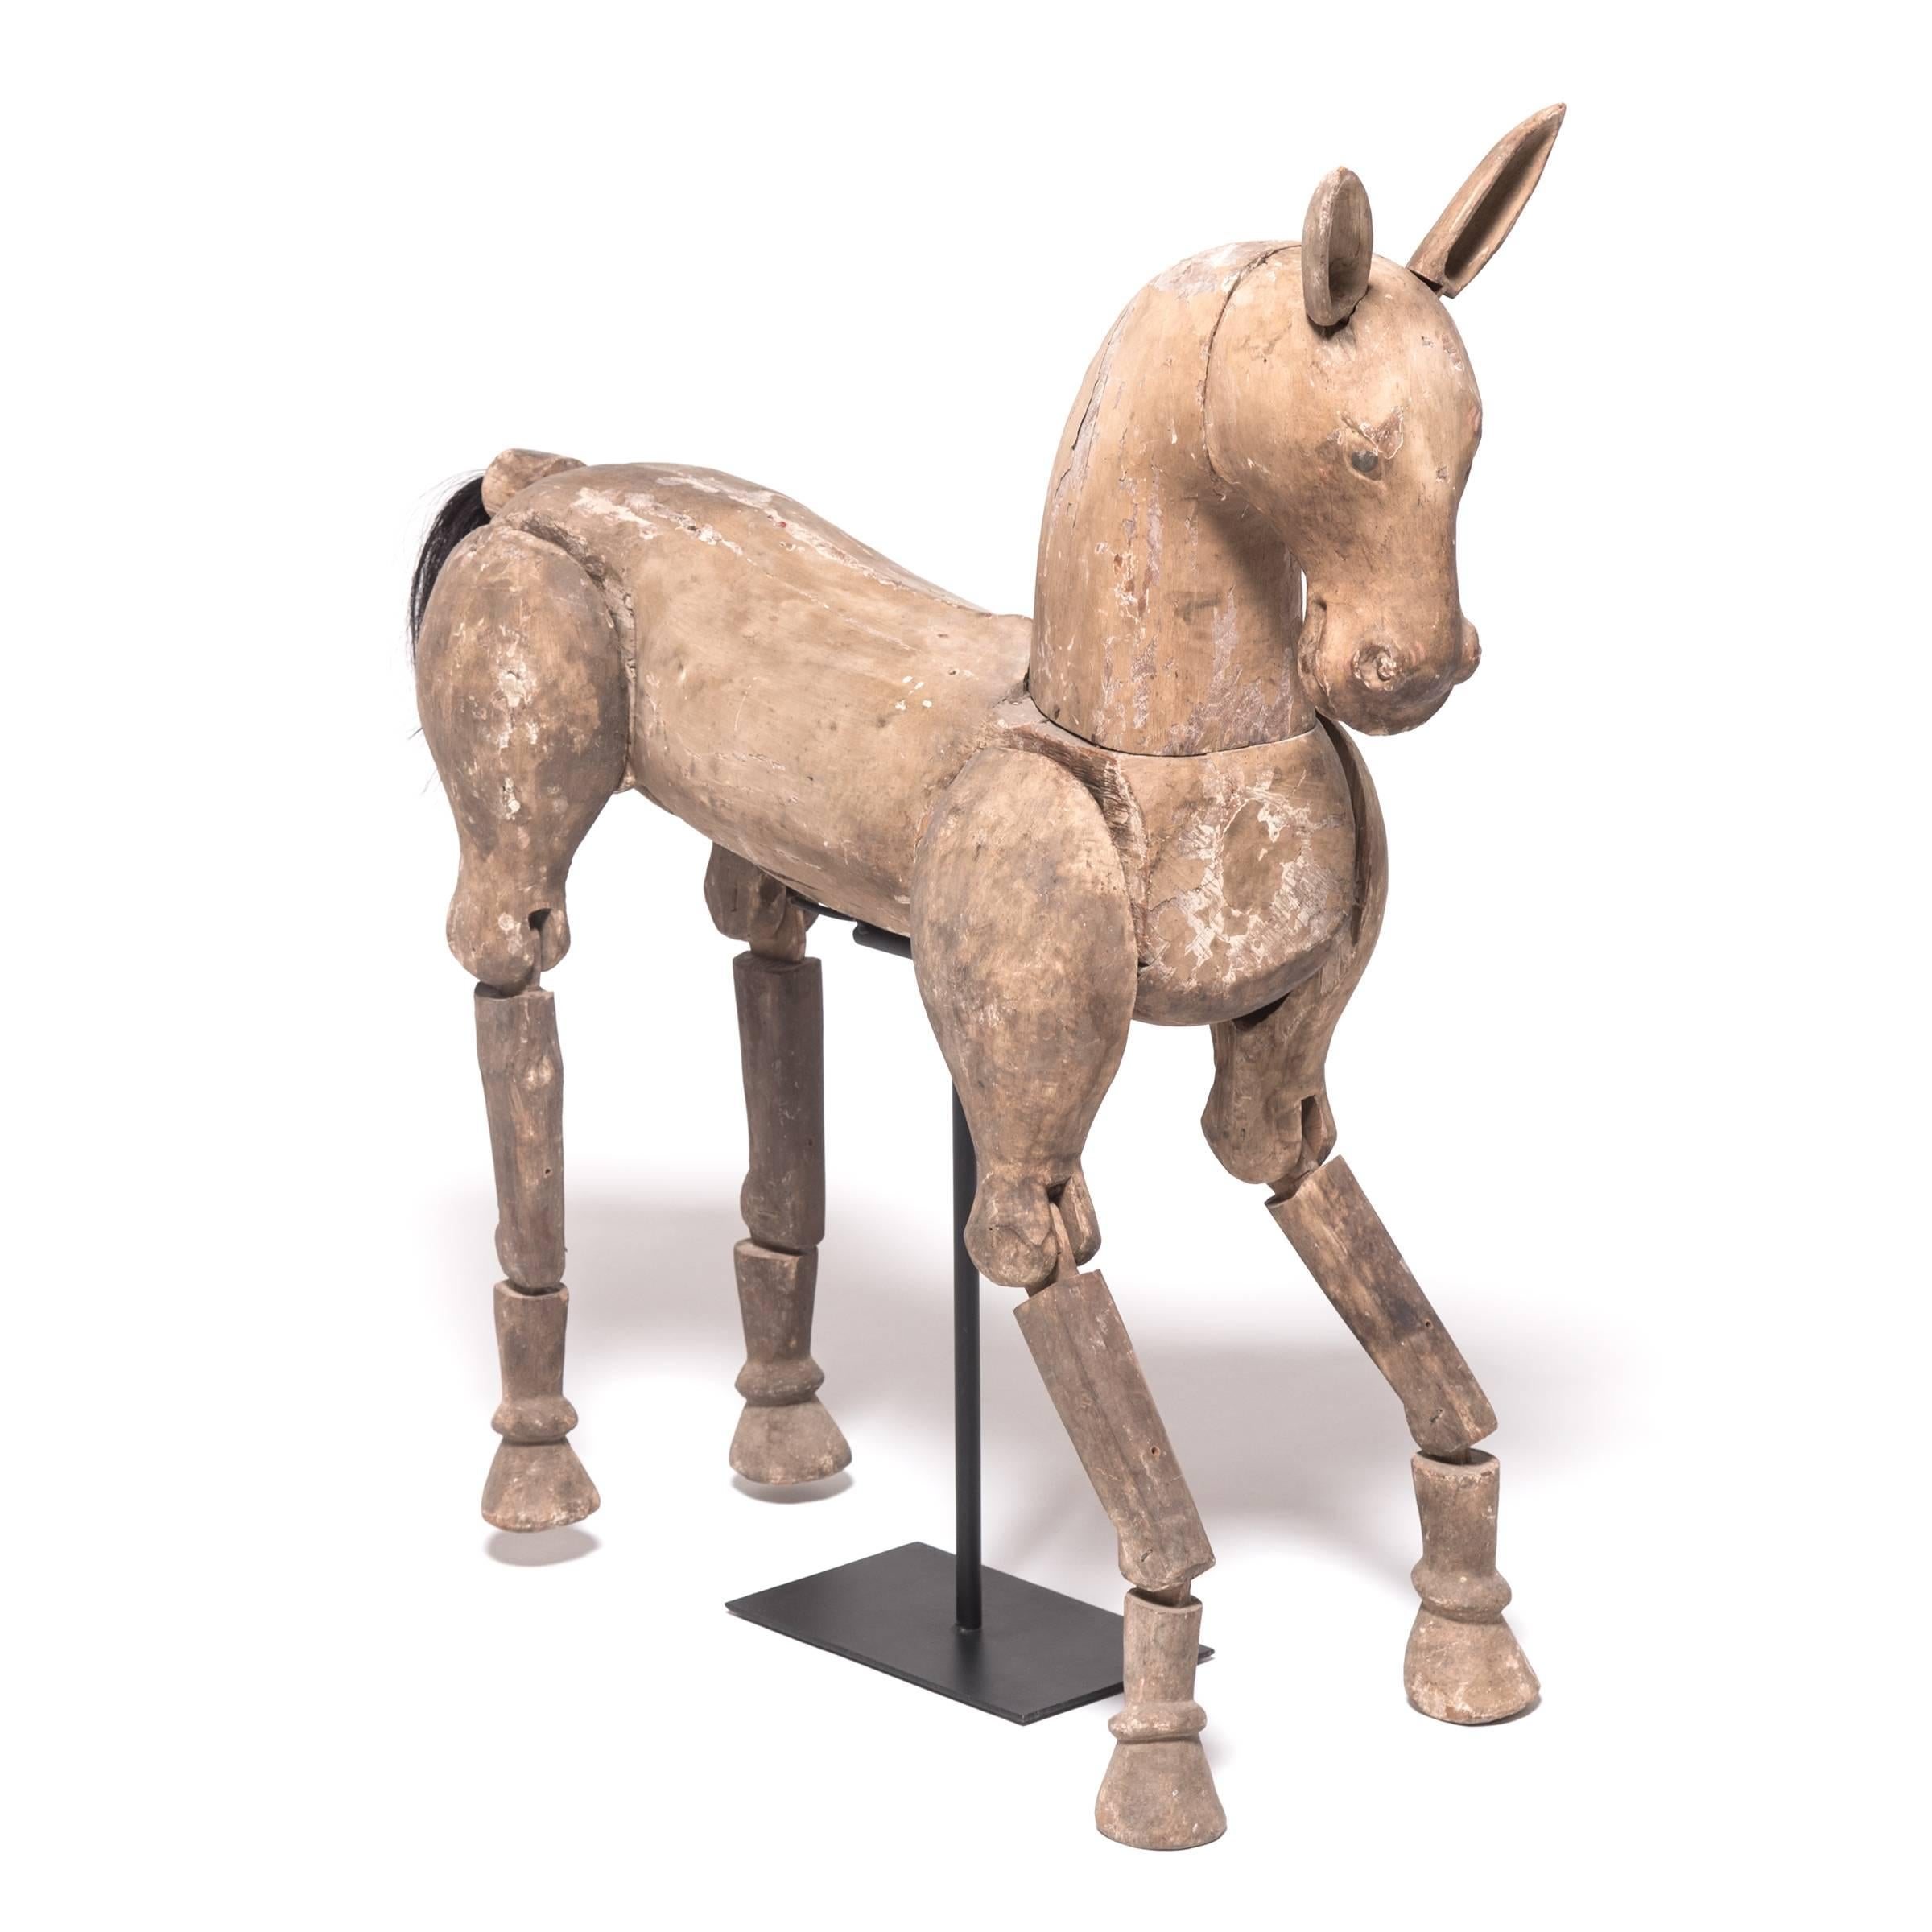 Once colorfully painted and tacked with brilliant saddlery, this wooden horse puppet likely starred in a puppet show as the mount of character from a Buddhist folktale or legend. Puppet plays were performed in Burma as early as the 1400s and reached